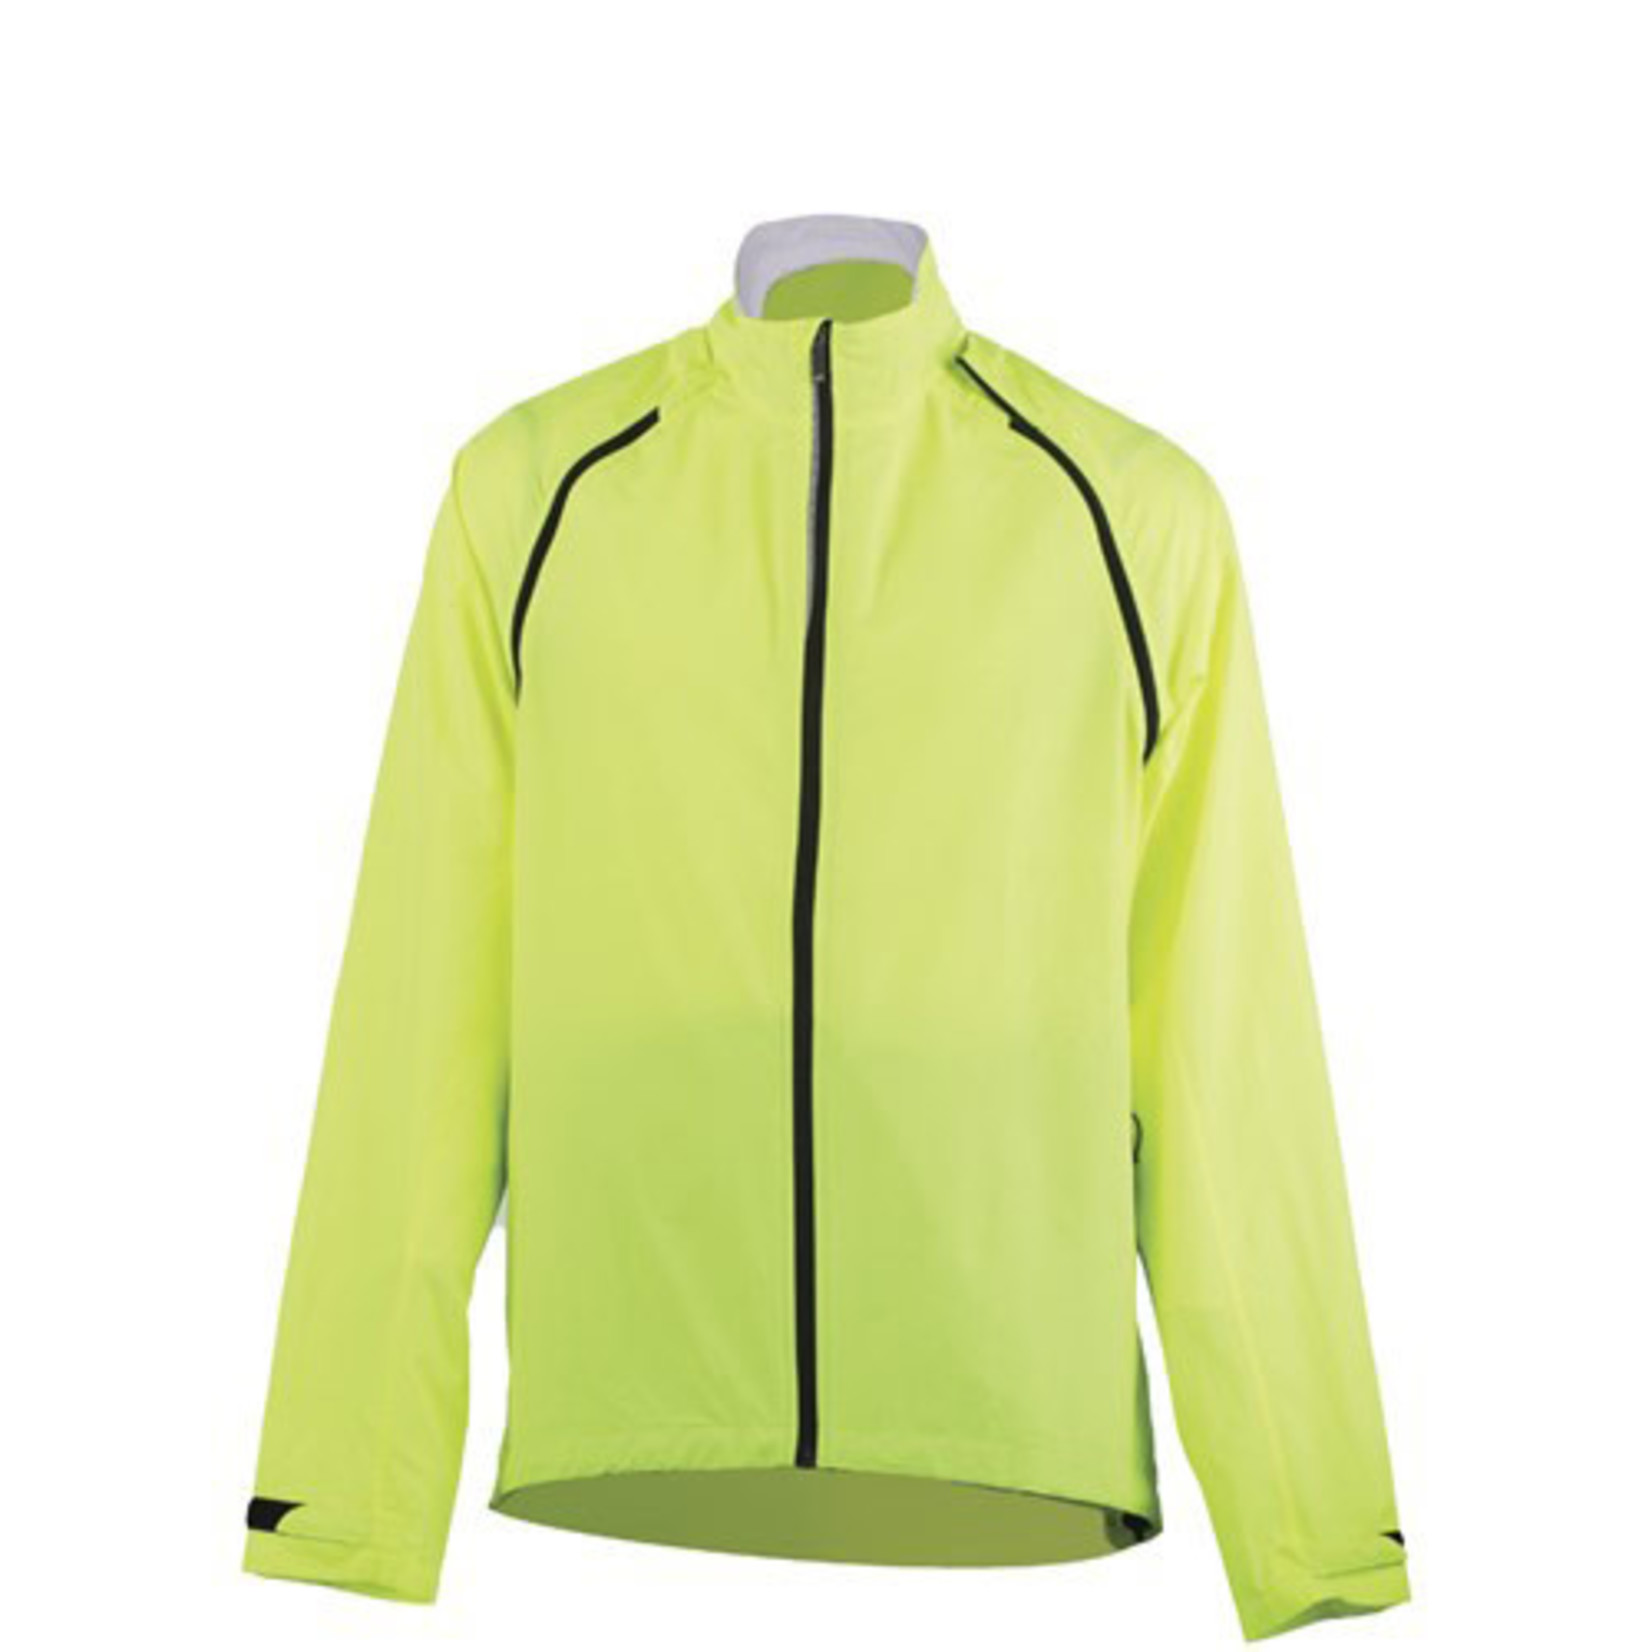 Bellwether Bellwether Cycling Jacket Velocity Convertible Jacket 2022 - Hi-Vis